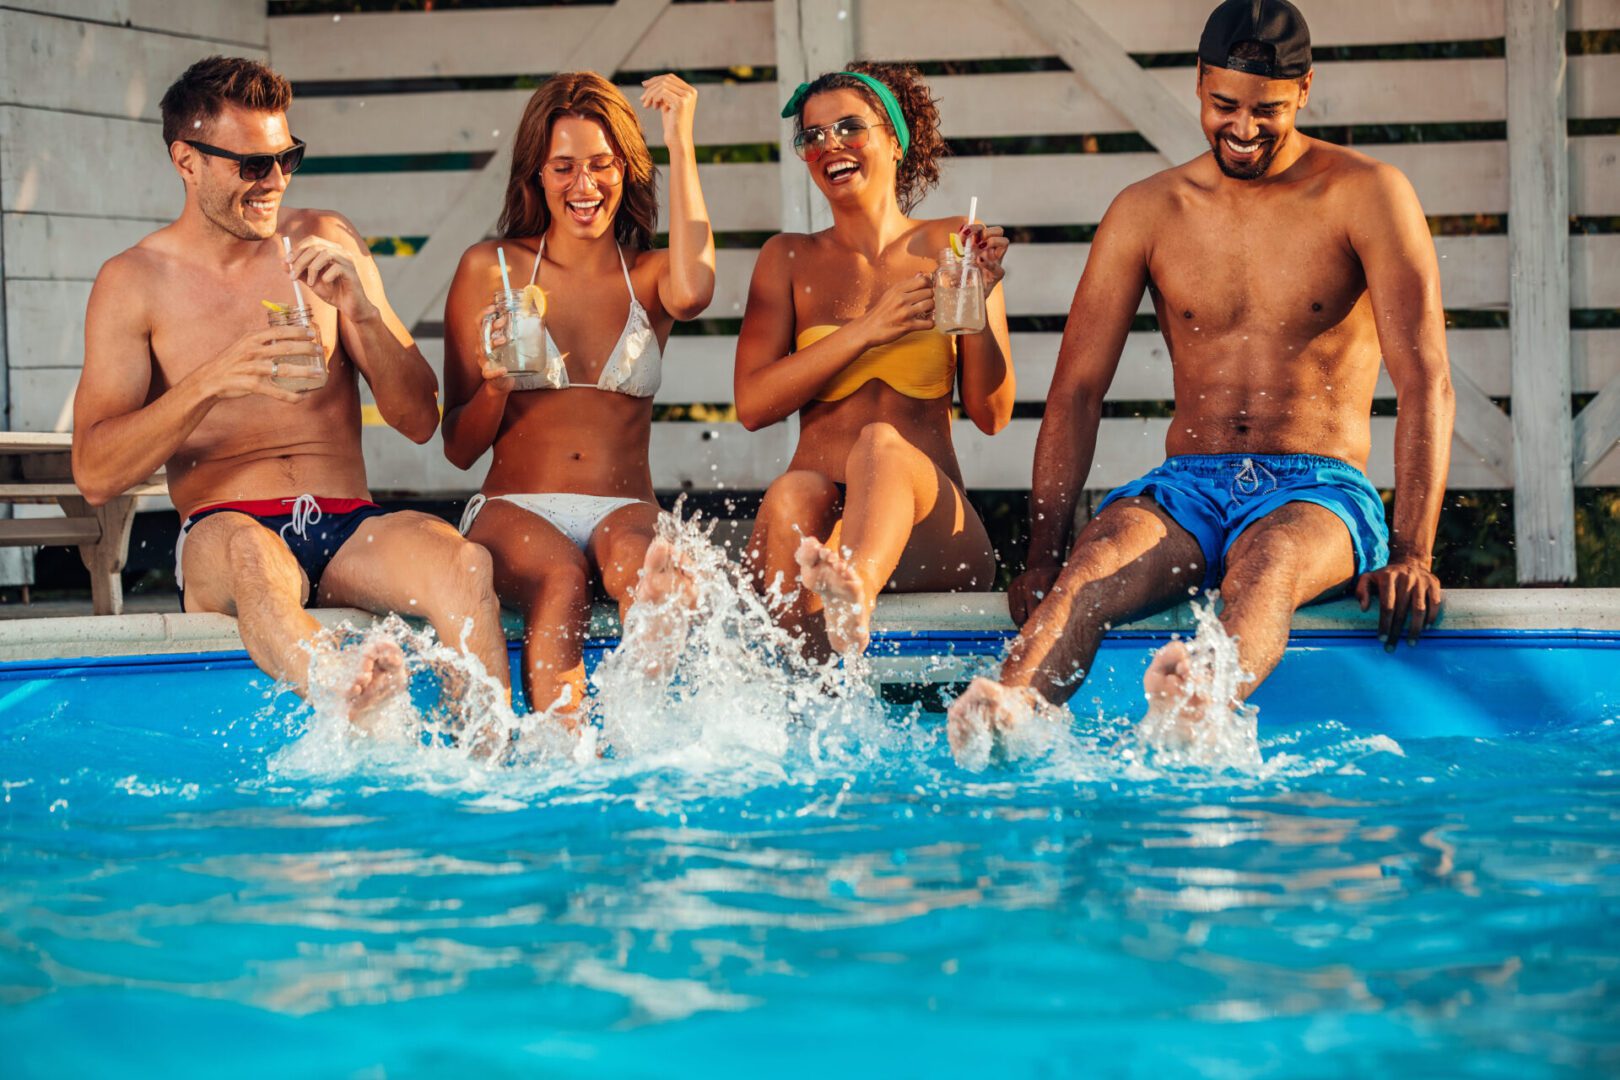 A group of people in the pool with drinks.